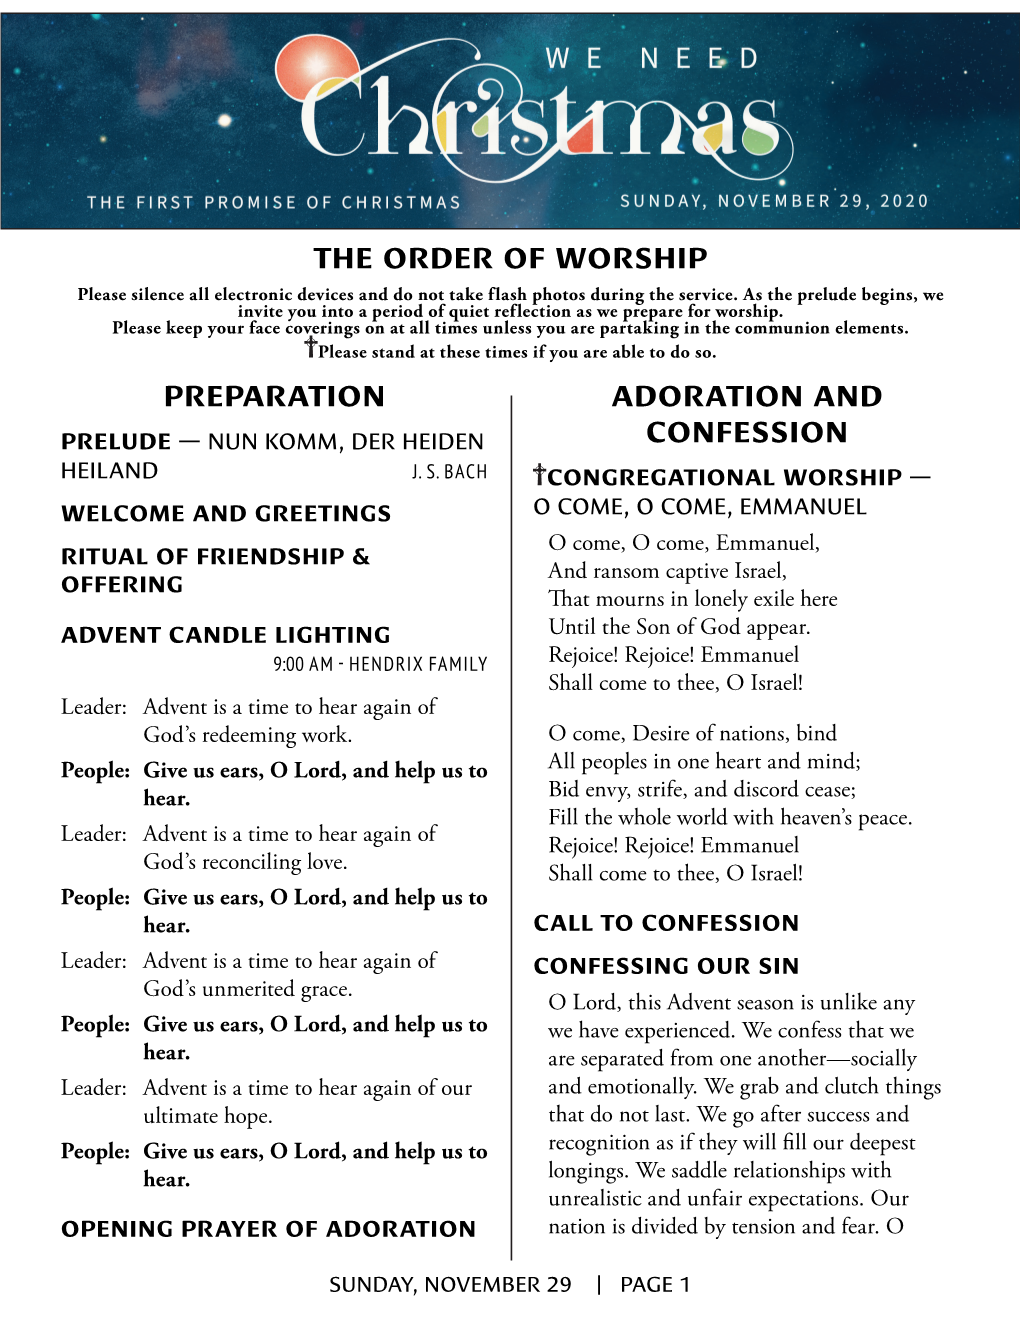 Preparation Adoration and Confession the Order of Worship